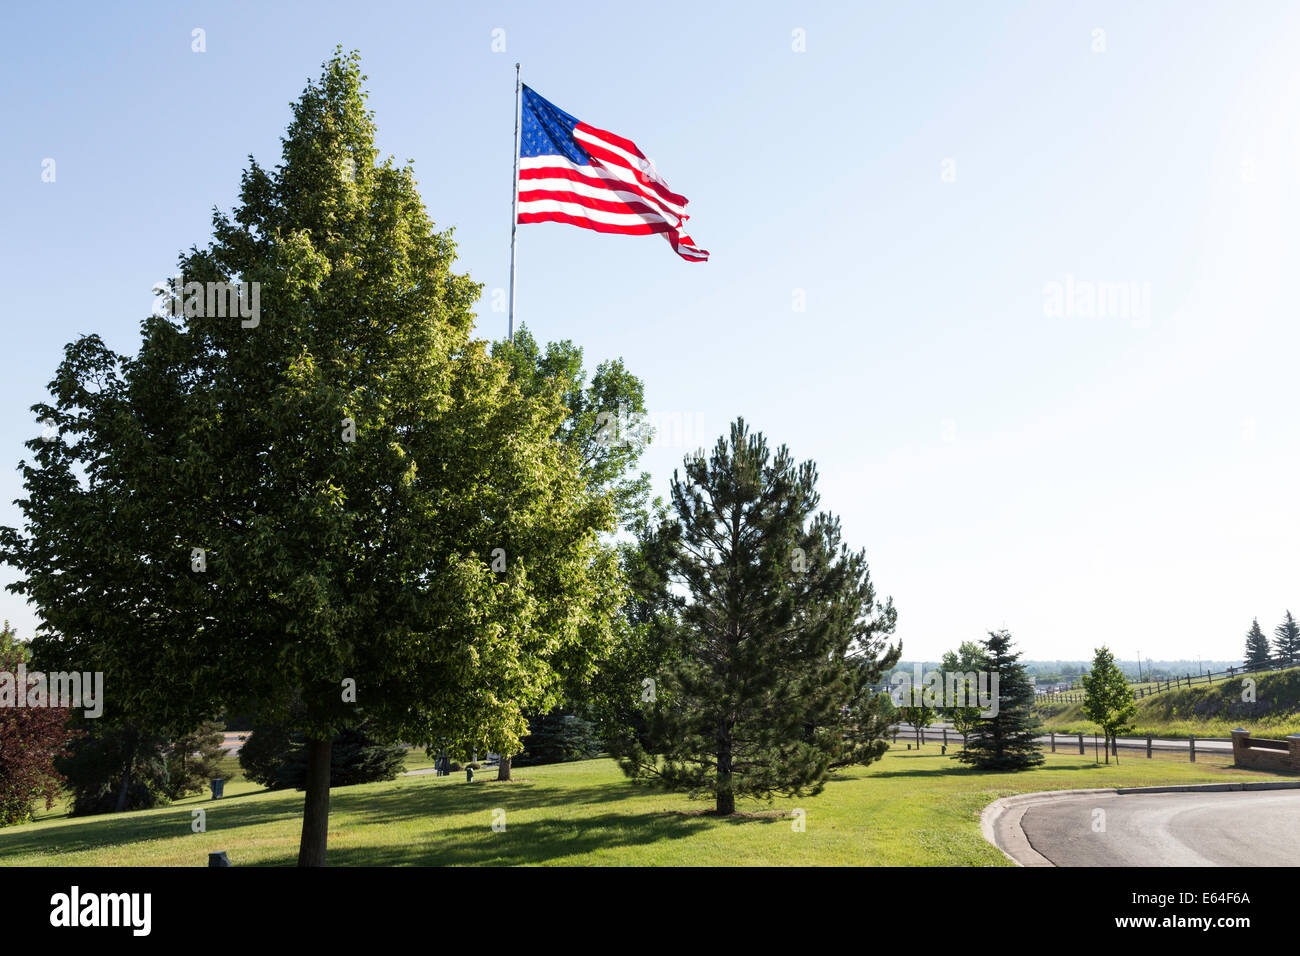 U.S. Flag Waves in the Wind, USA Stock Photo